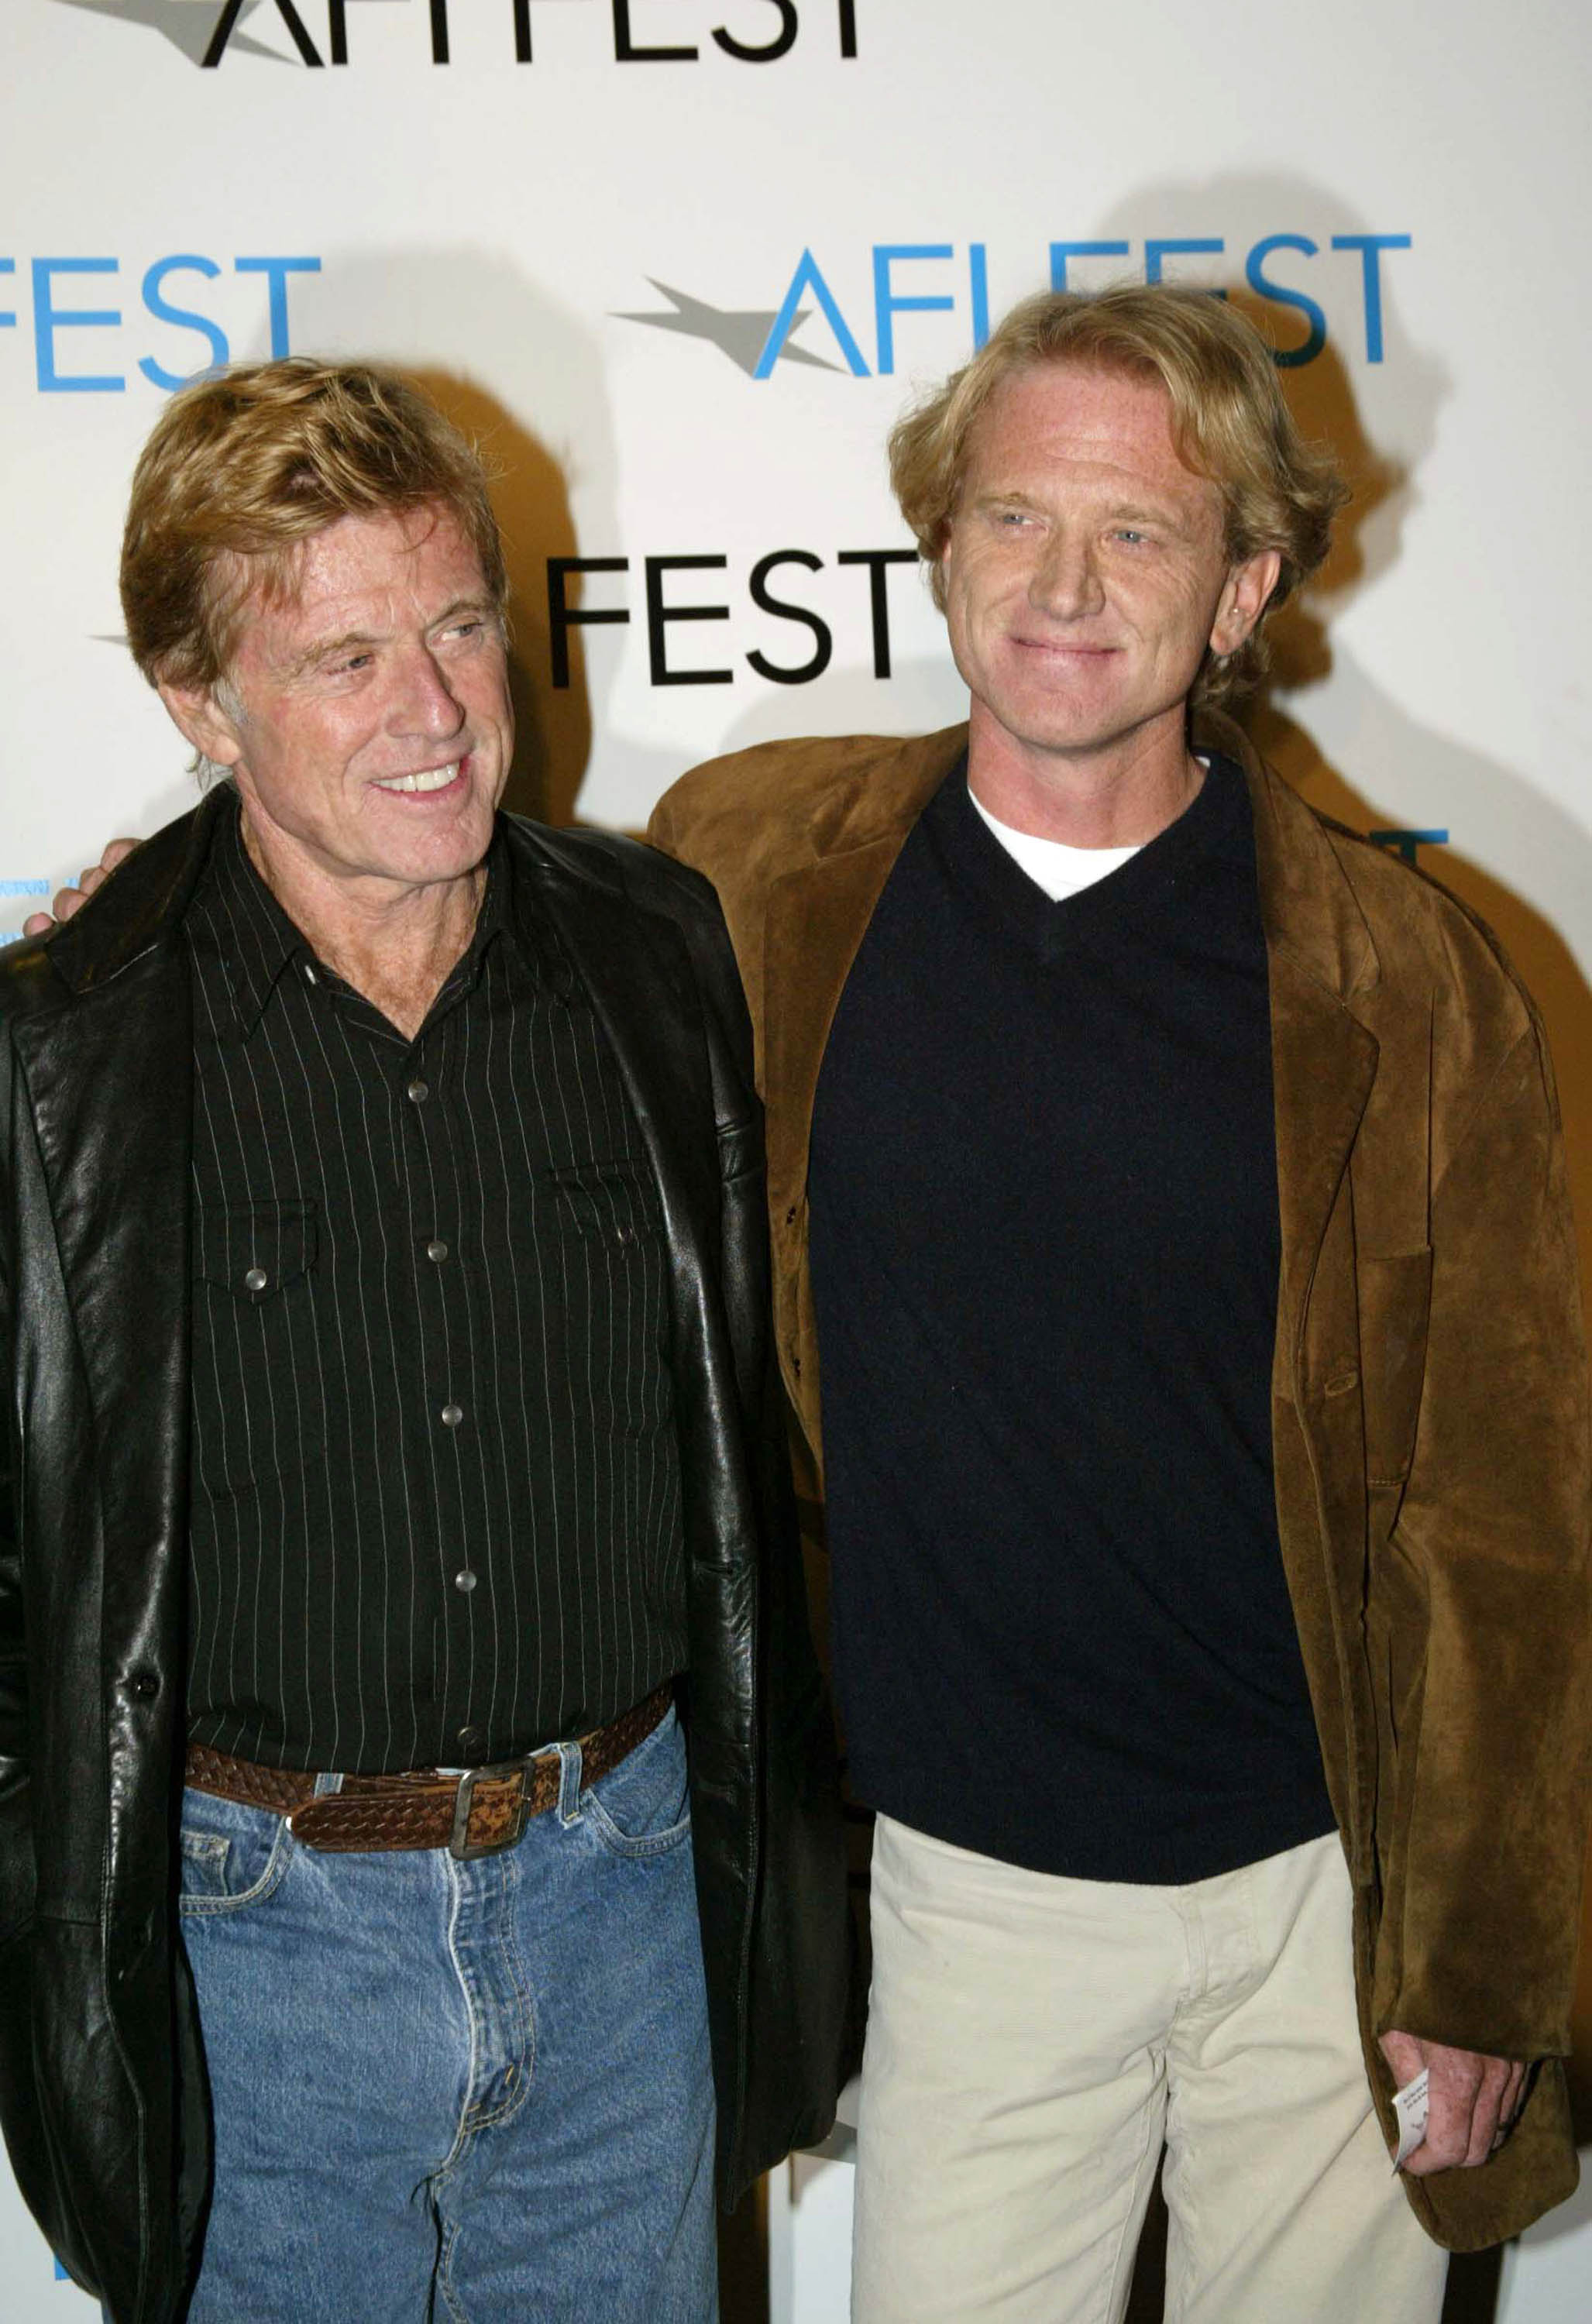 Robert Redford and James Redford during AFI Film Festival Screening of James Redford's Directorial Debut "Spin" at Arclight Cinema in Hollywood, California on November 8, 2003. | Source: Getty Images